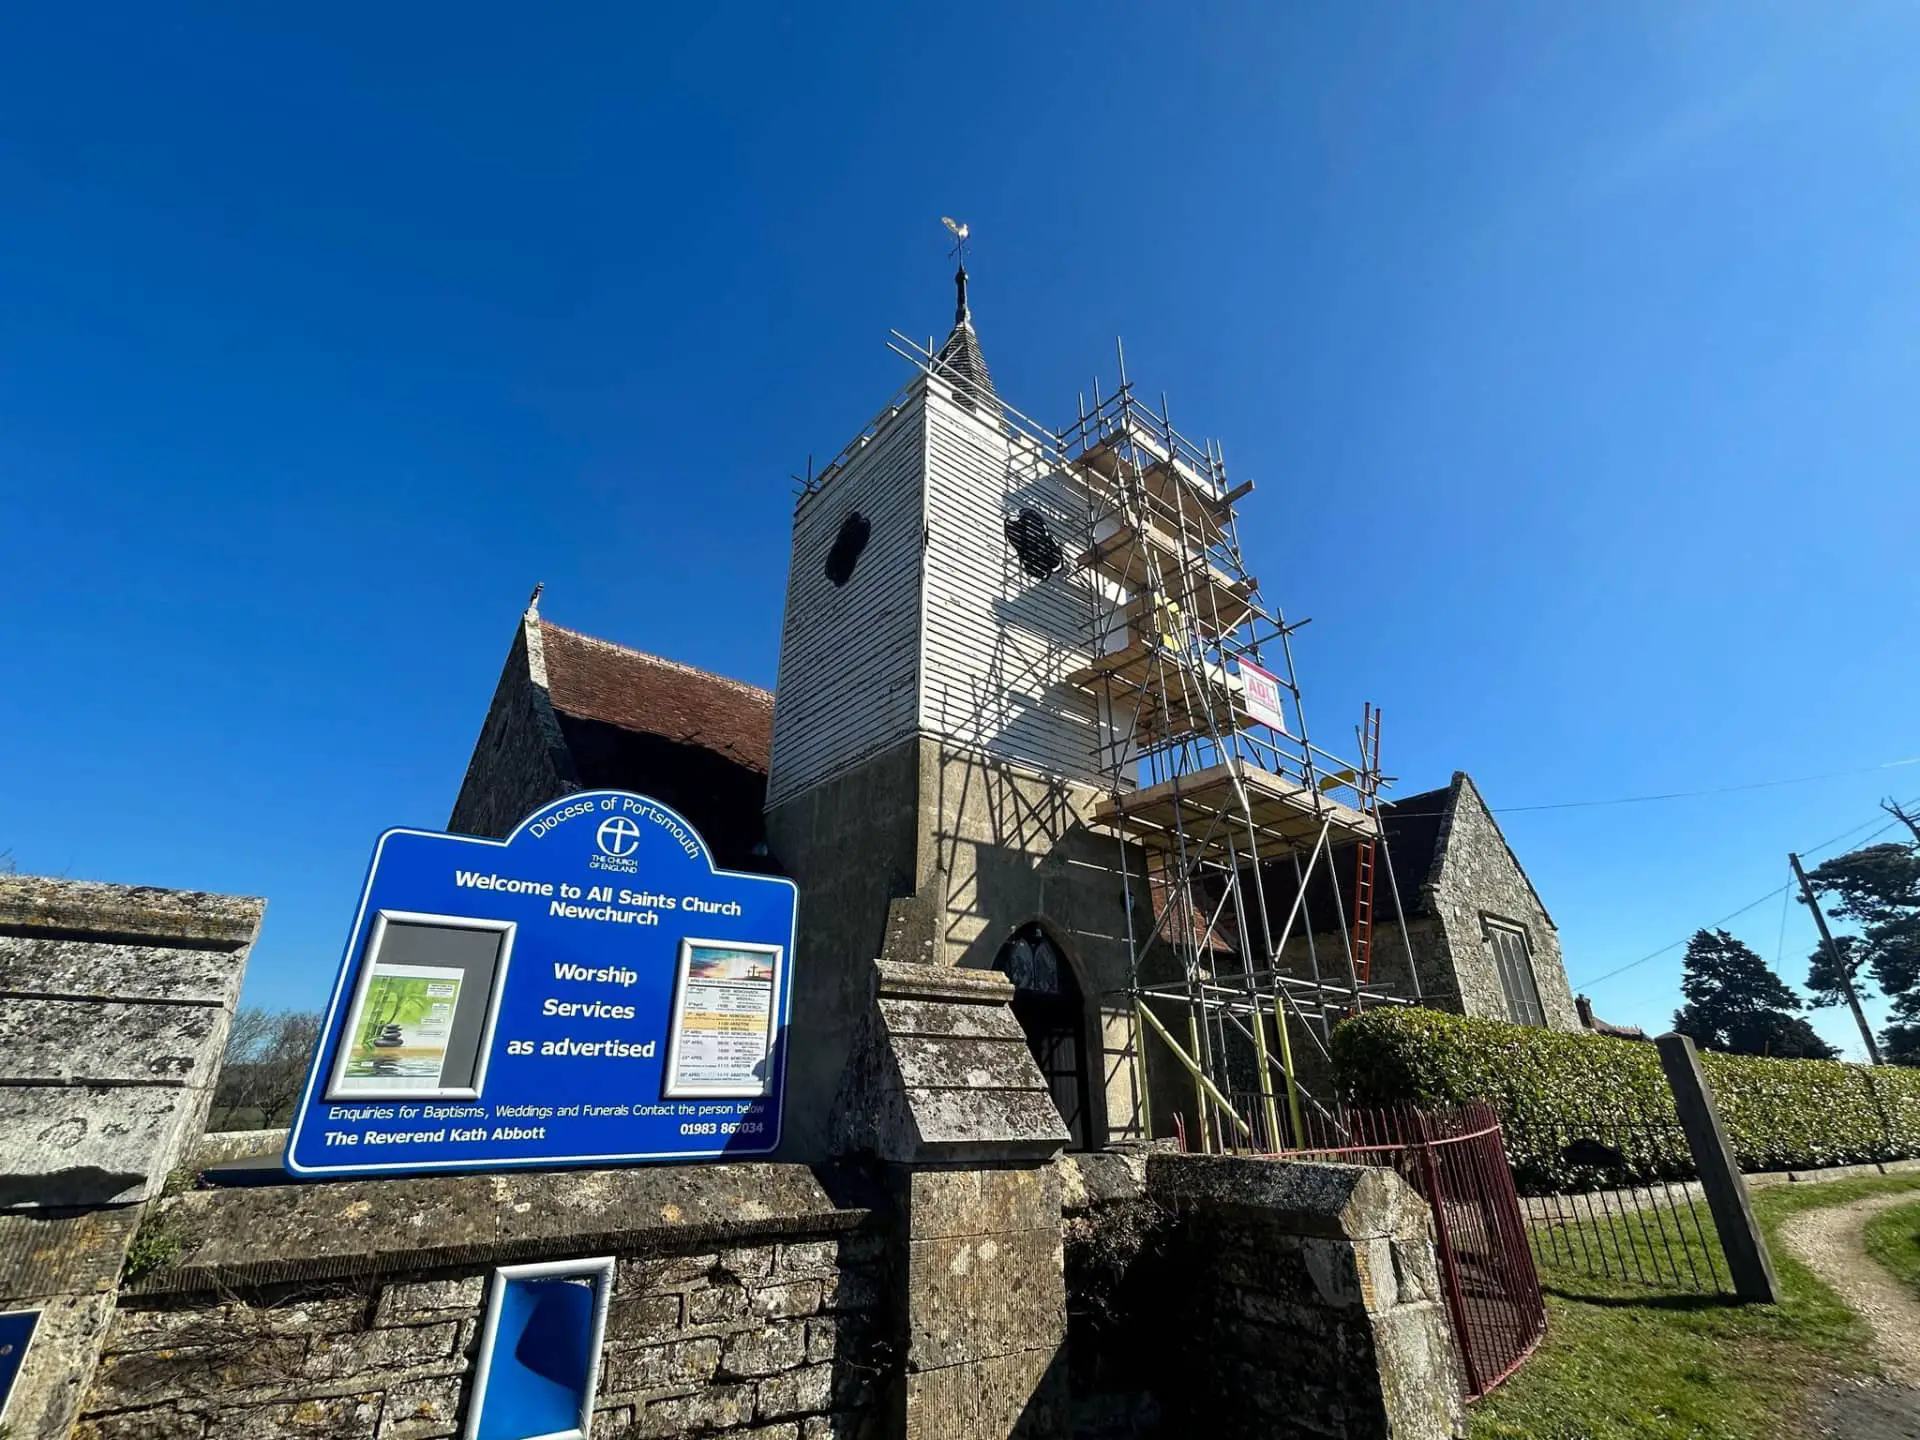 All Saints Church Tower with scaffold